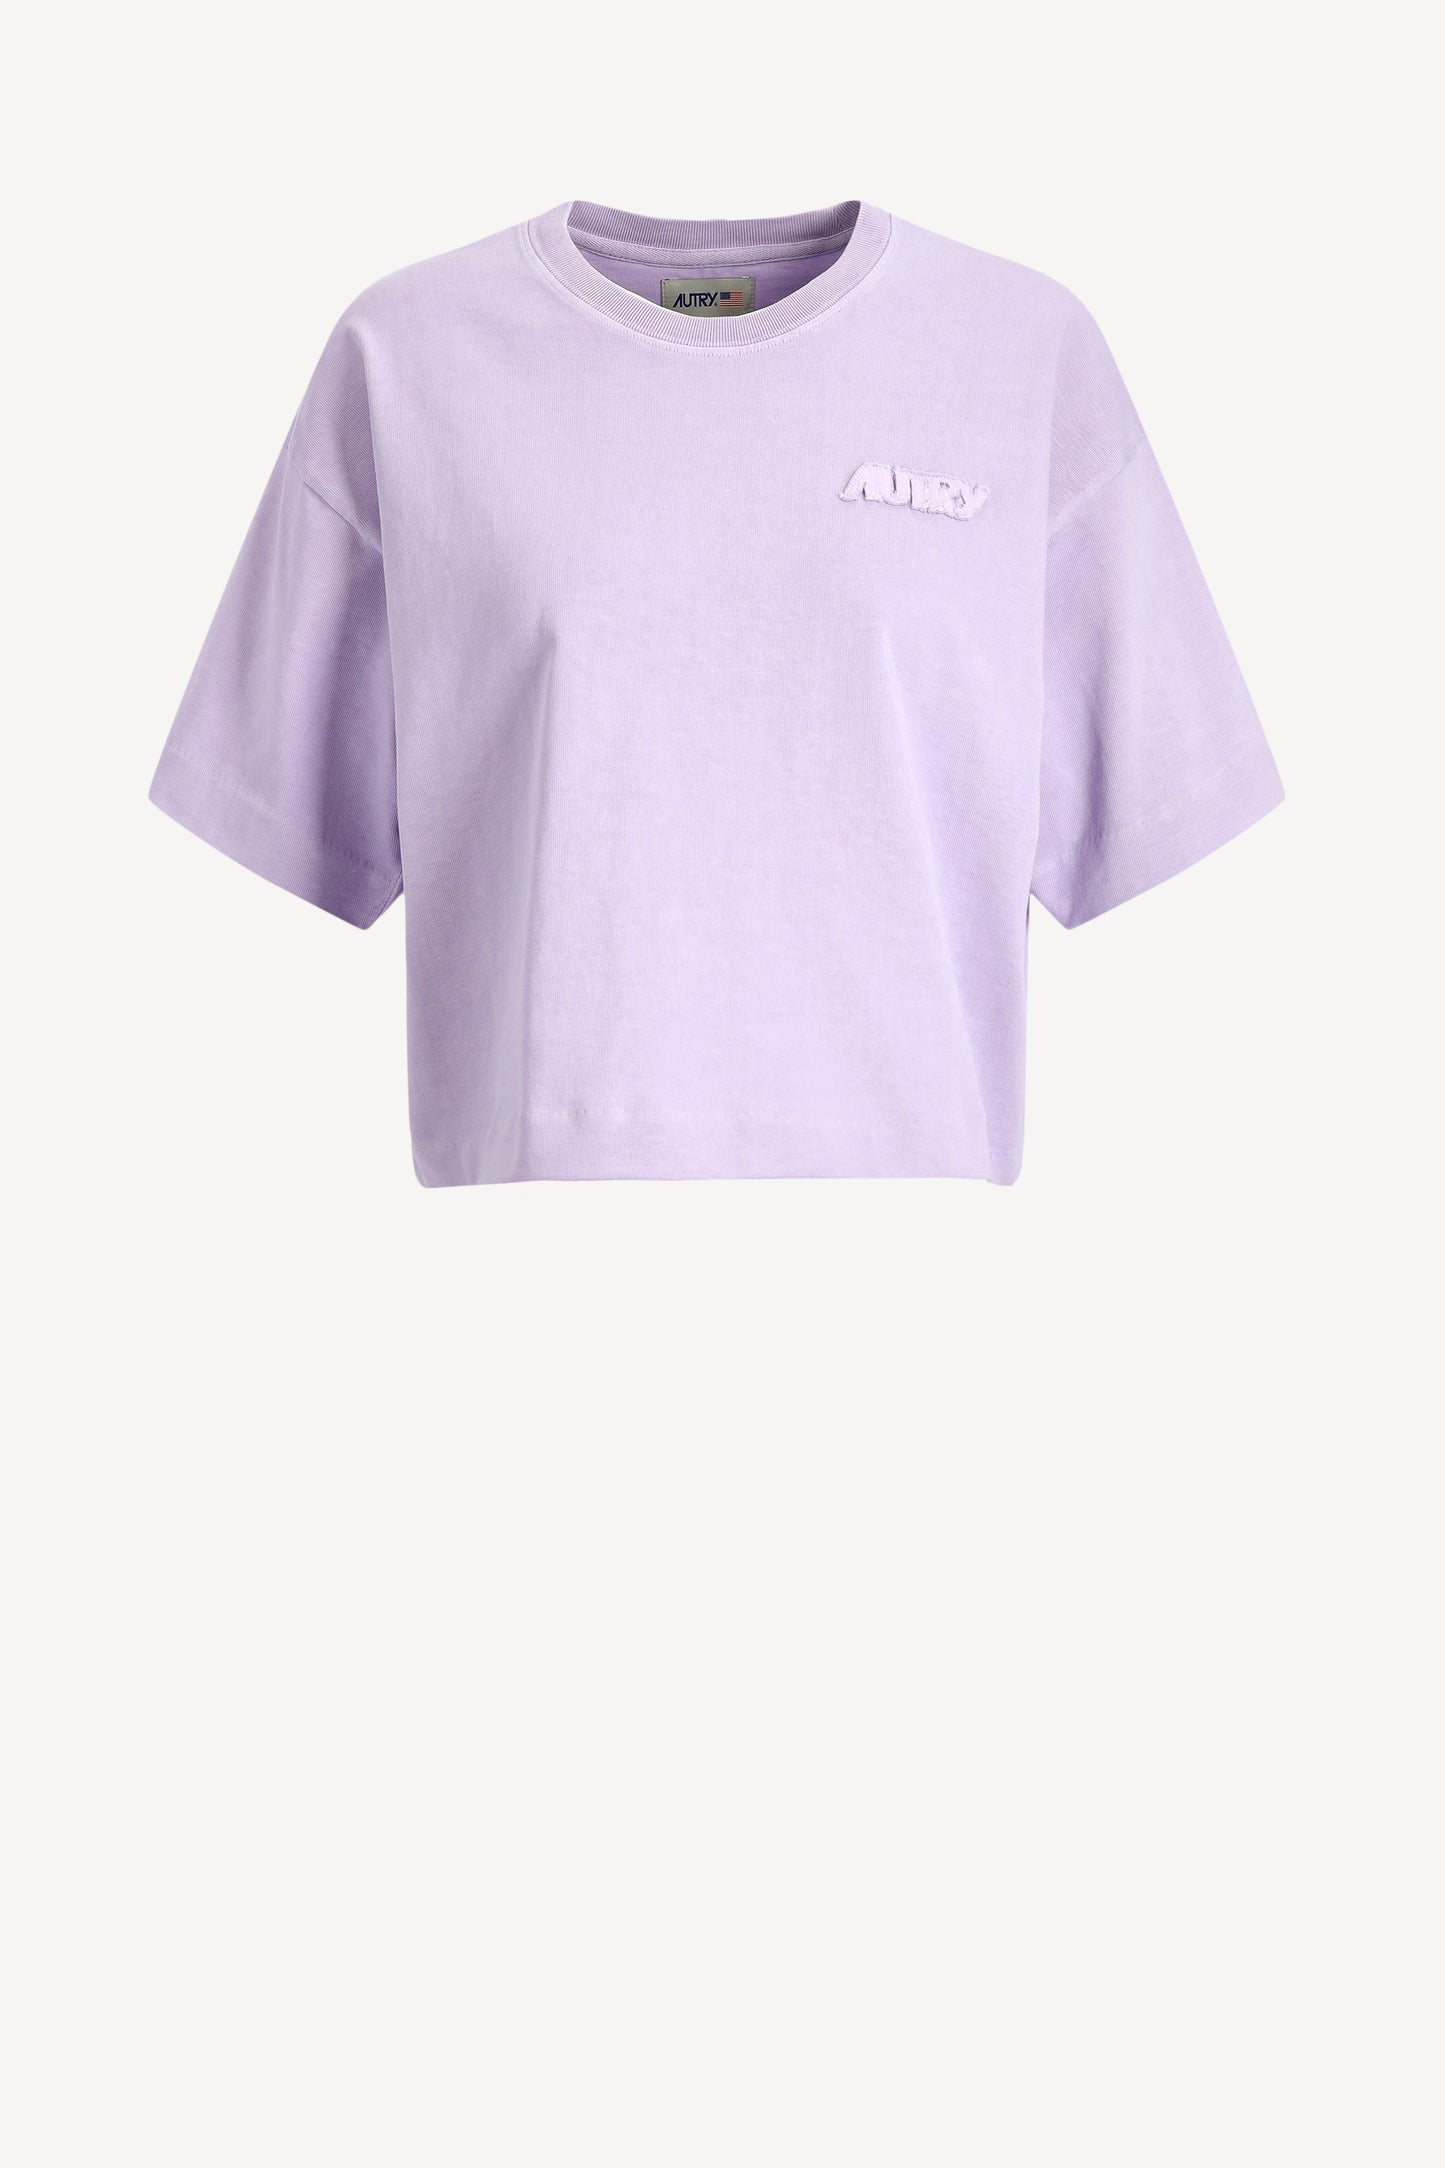 T-Shirt in Pastel LilaAutry - Anita Hass